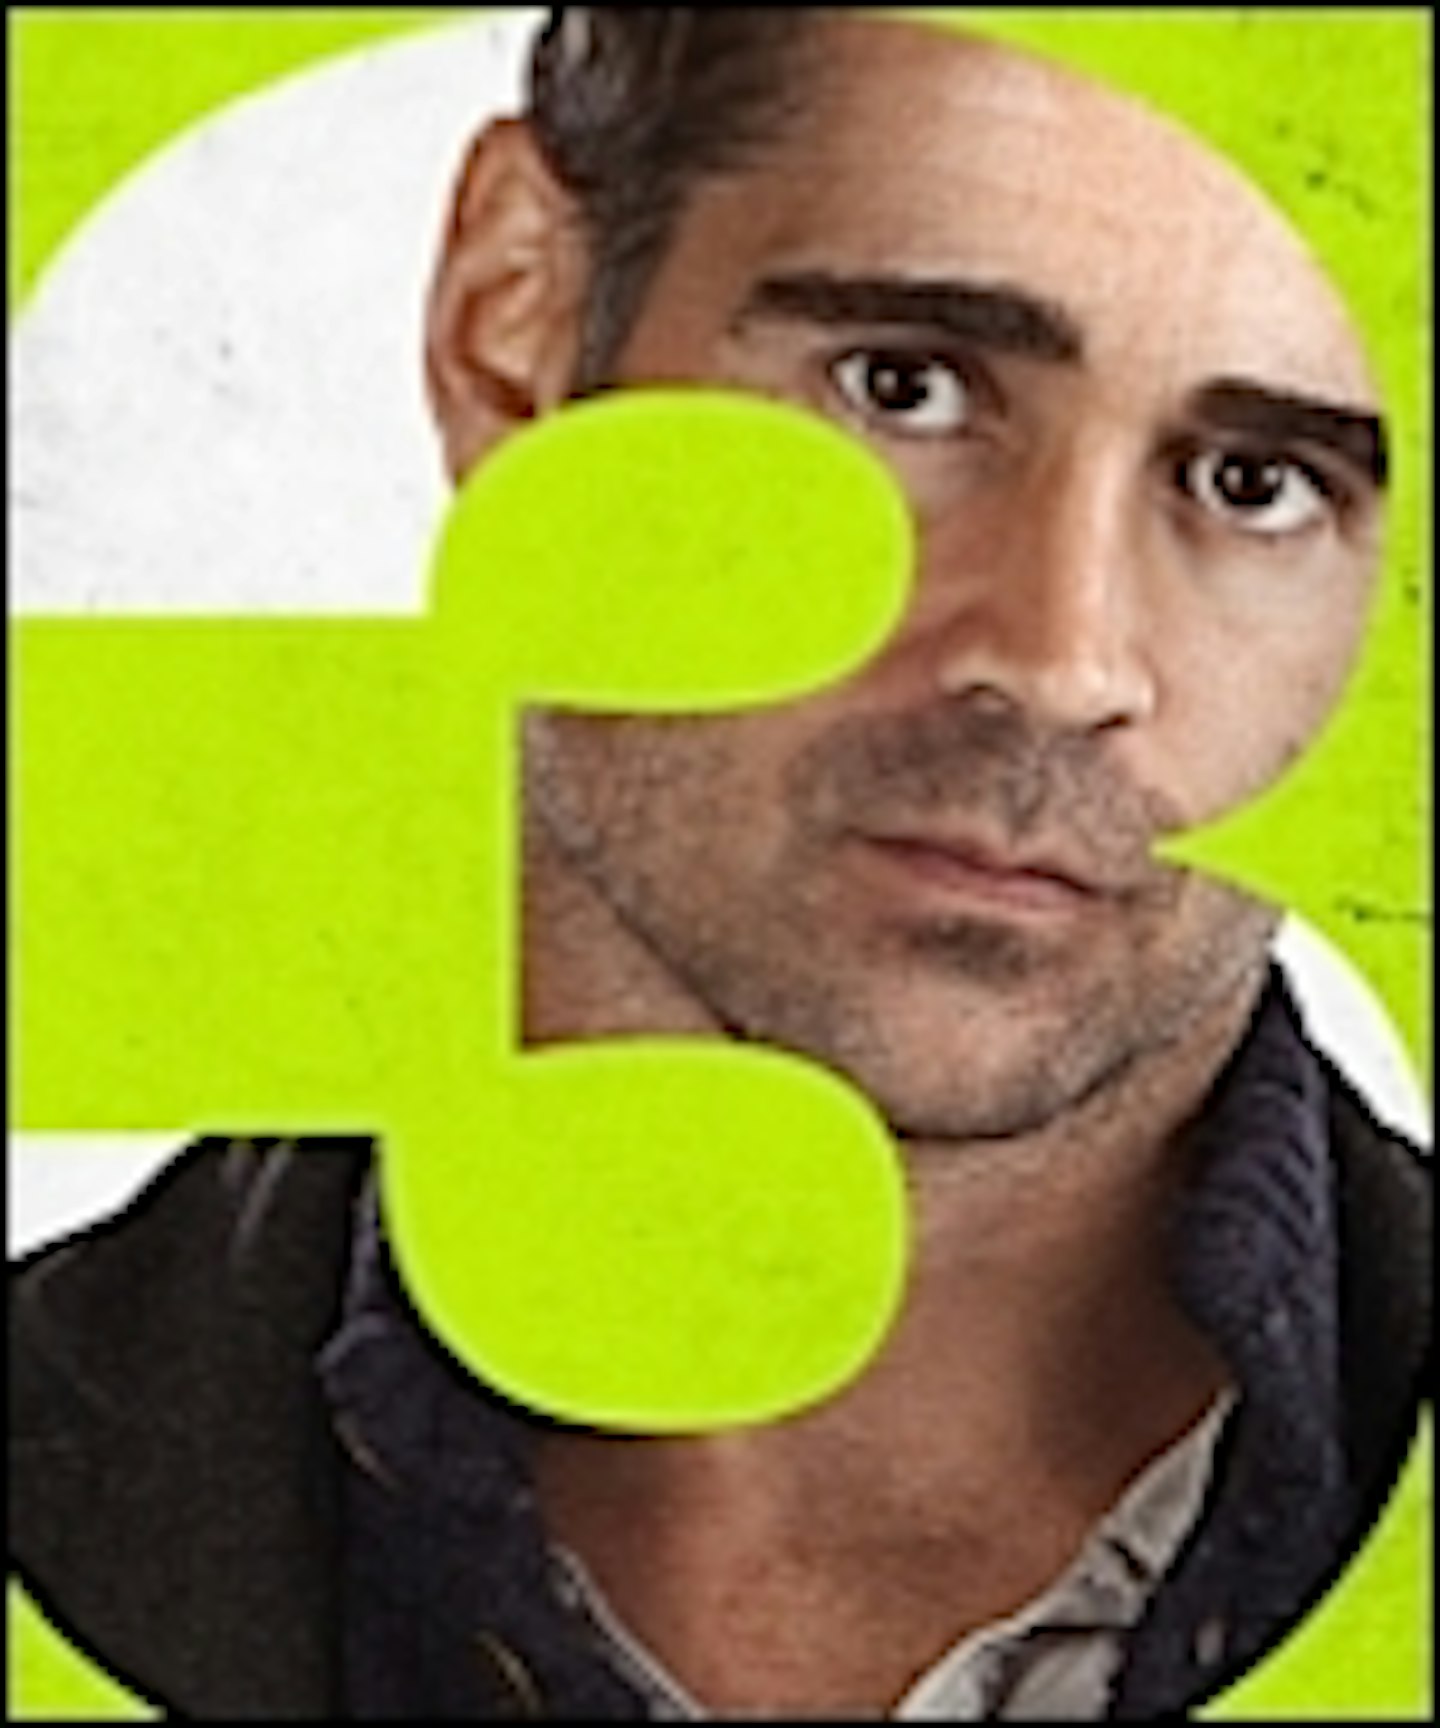 Seven Psychopaths Character Posters